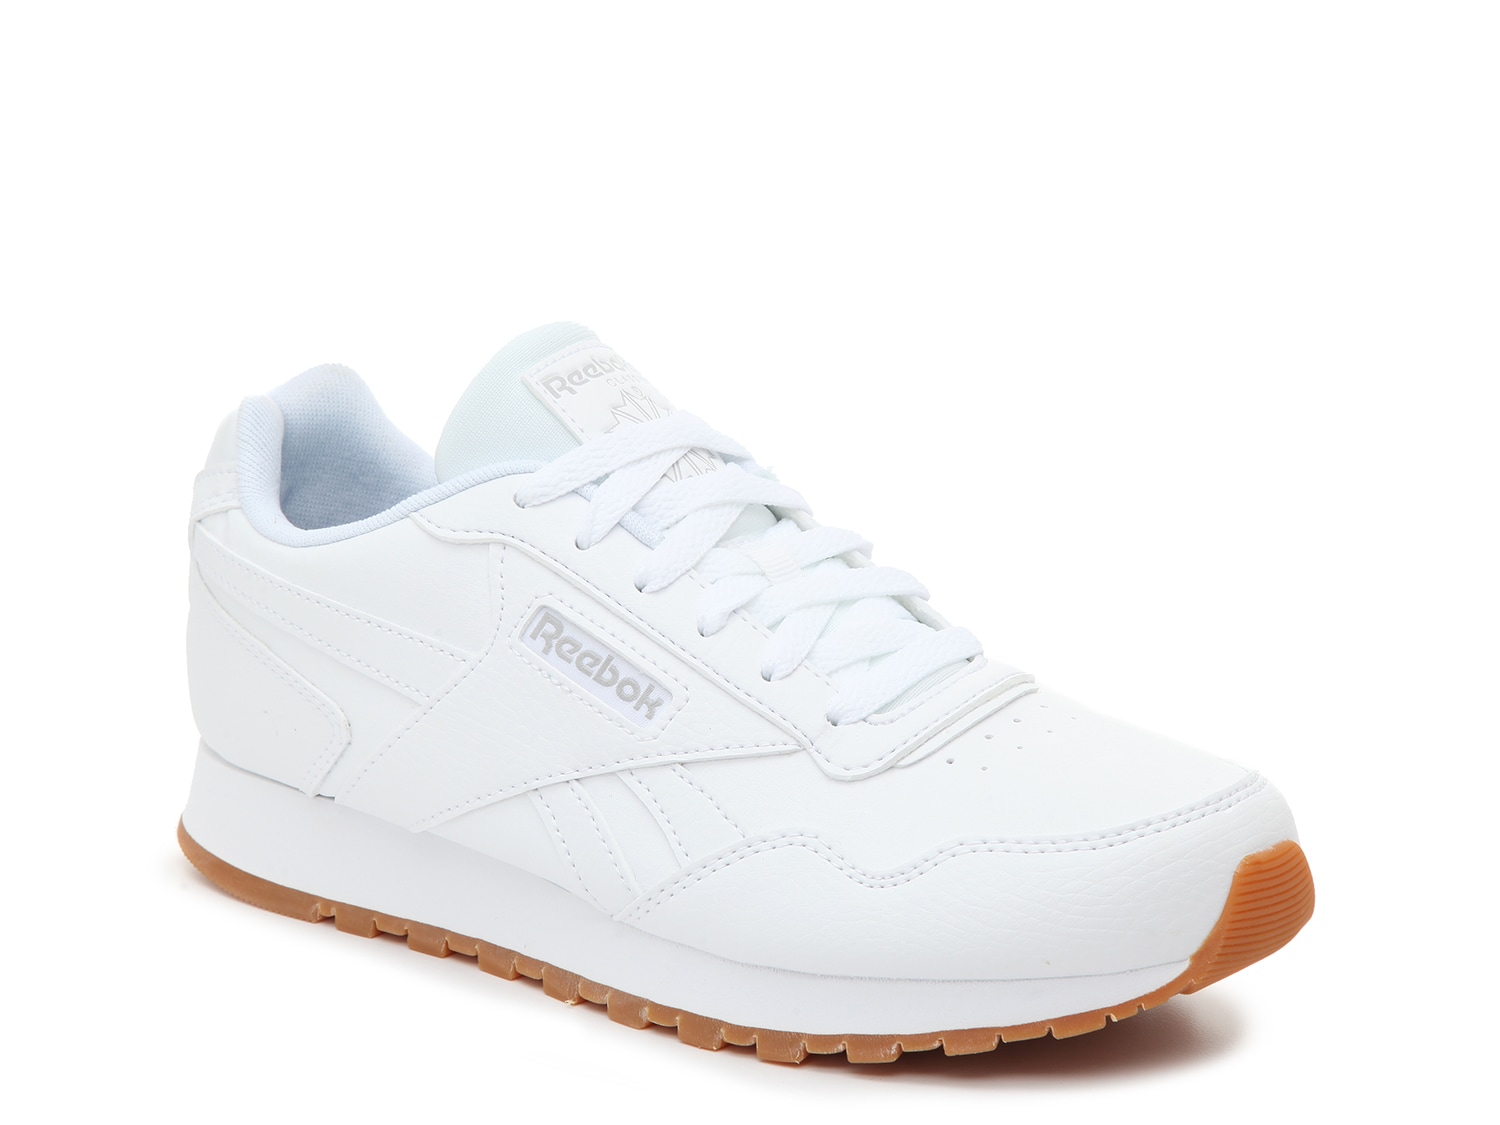 reebok shoes with price